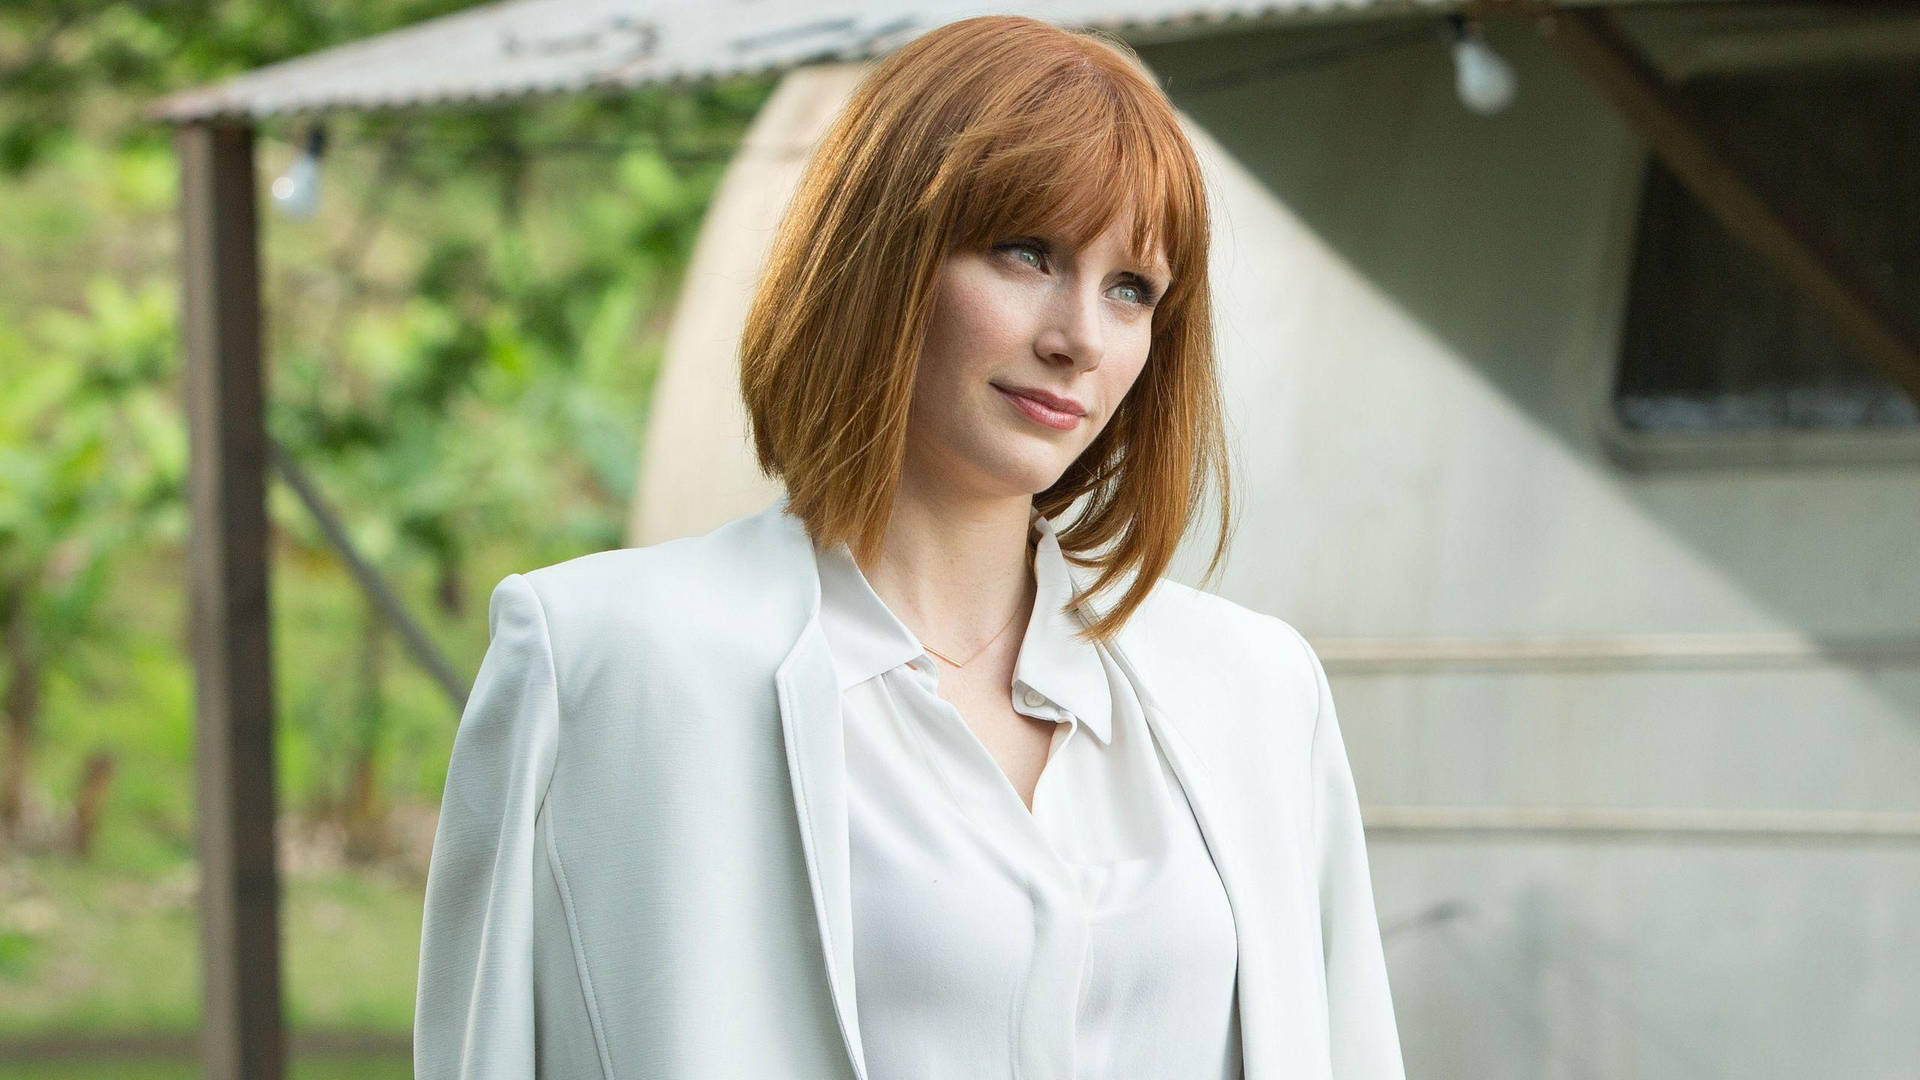 Download Bryce Dallas Howard White Aesthetic Outfit Jurassic World  Wallpaper 